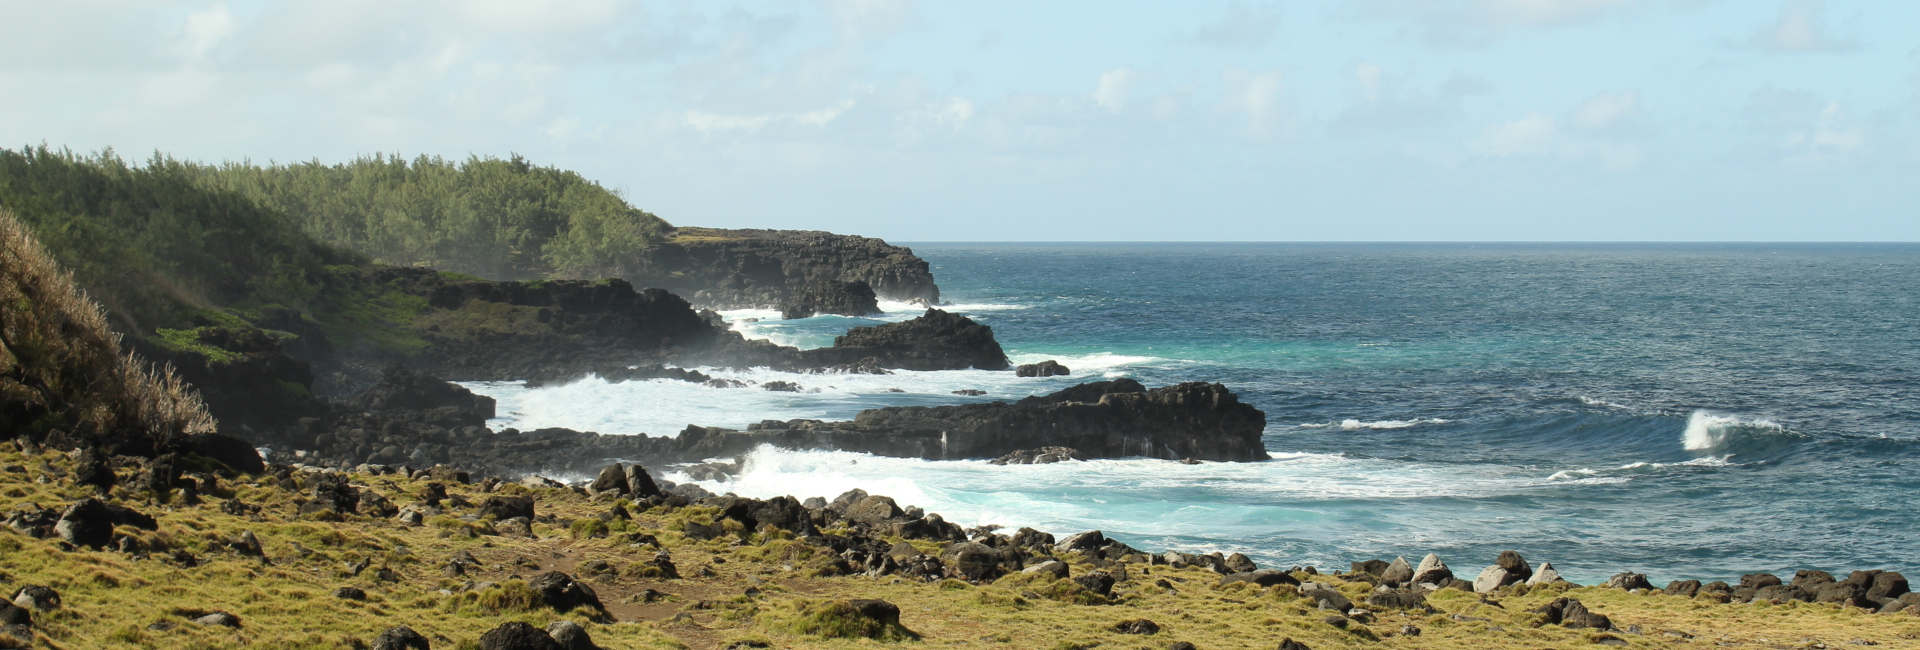 The cliffs in the south of Mauritius